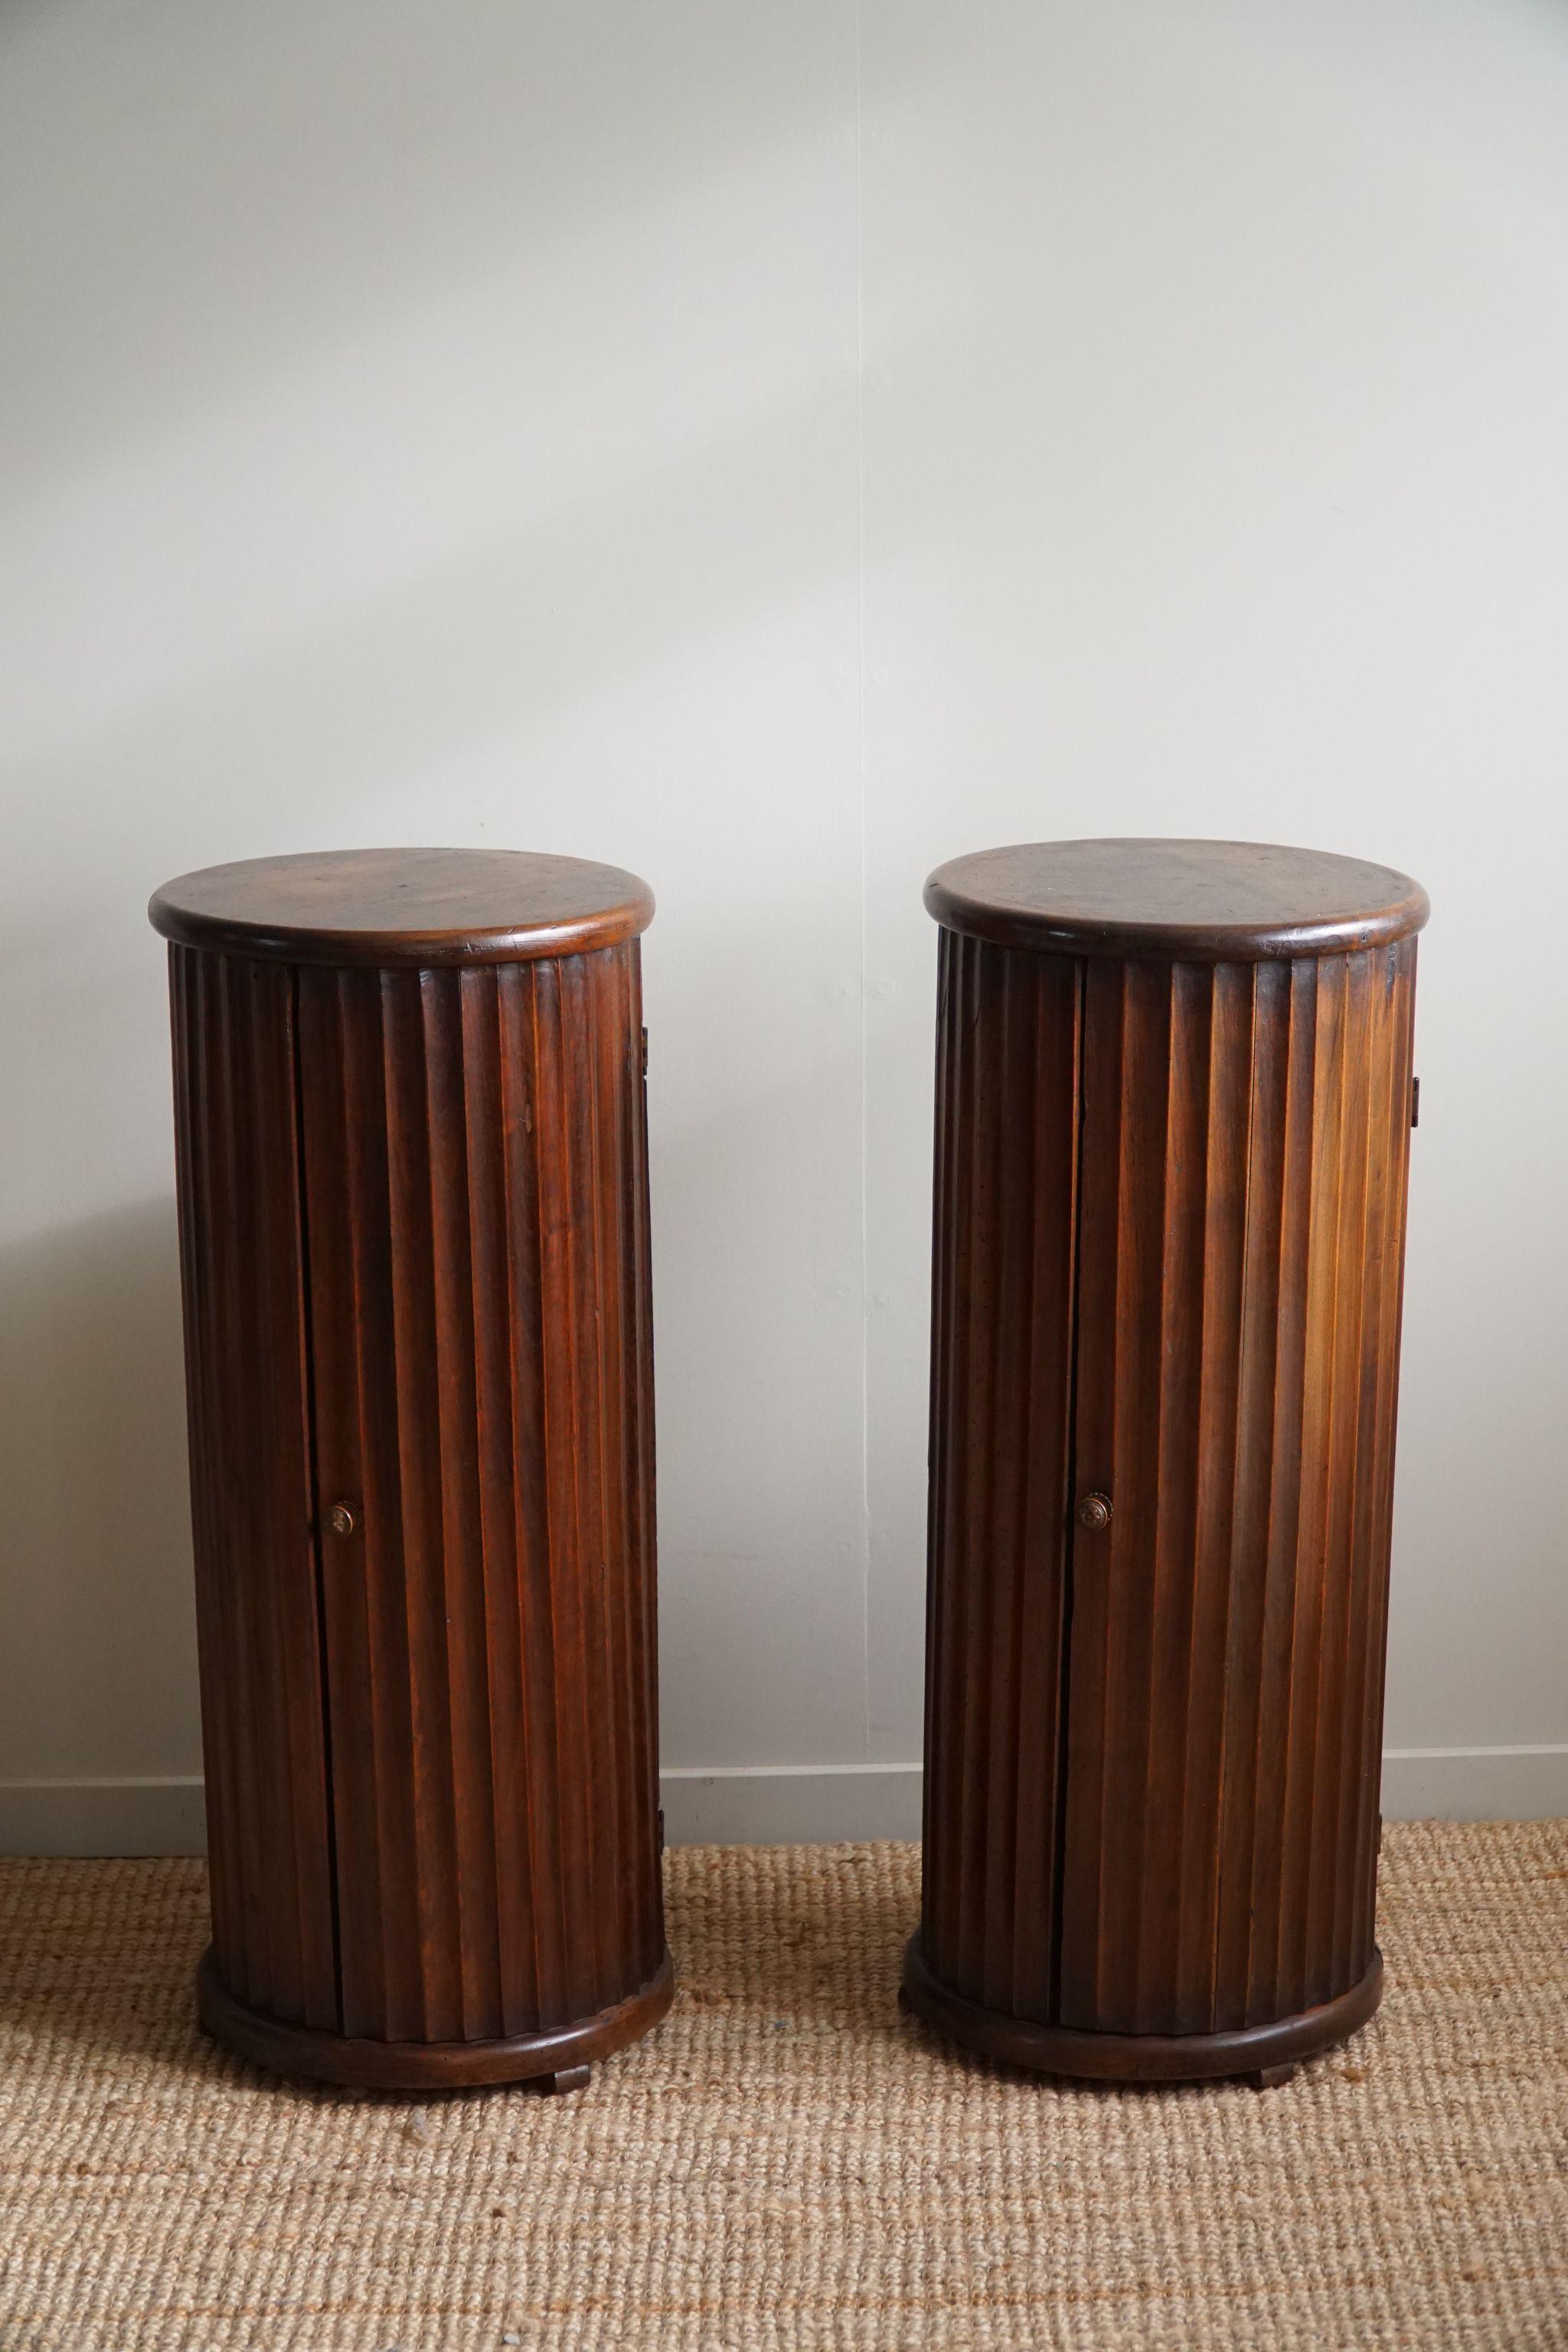 A Pair of Antique Pedestals With Storage, Nutwood, Italian Cabinetmaker, 1880s  14